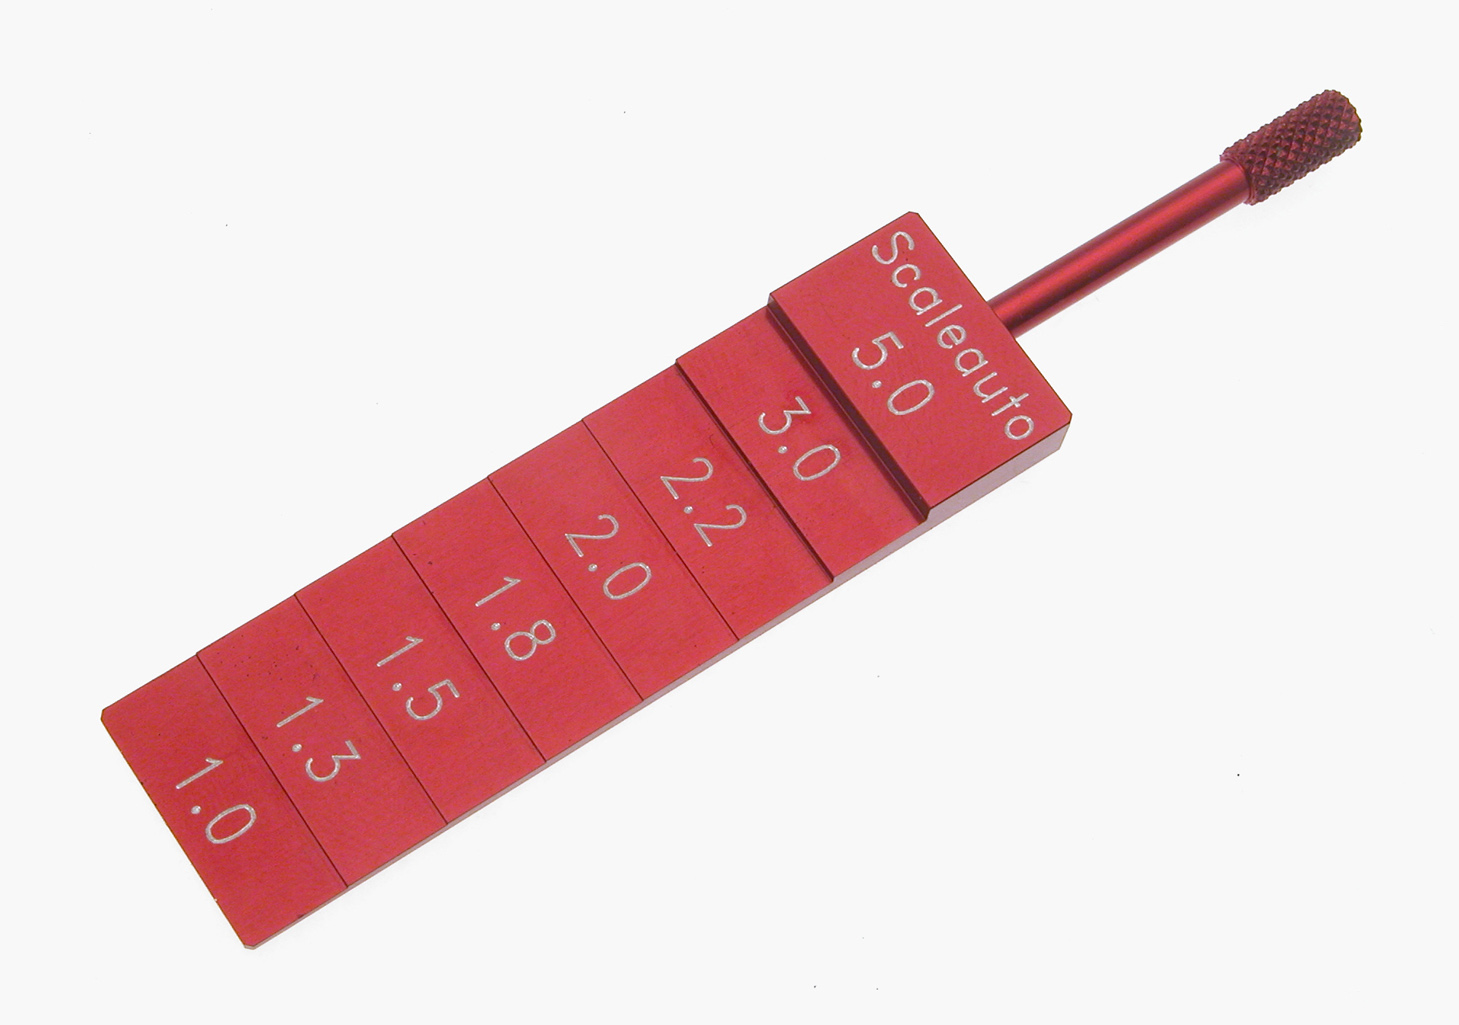 SC-5043 Tech tool for height measures